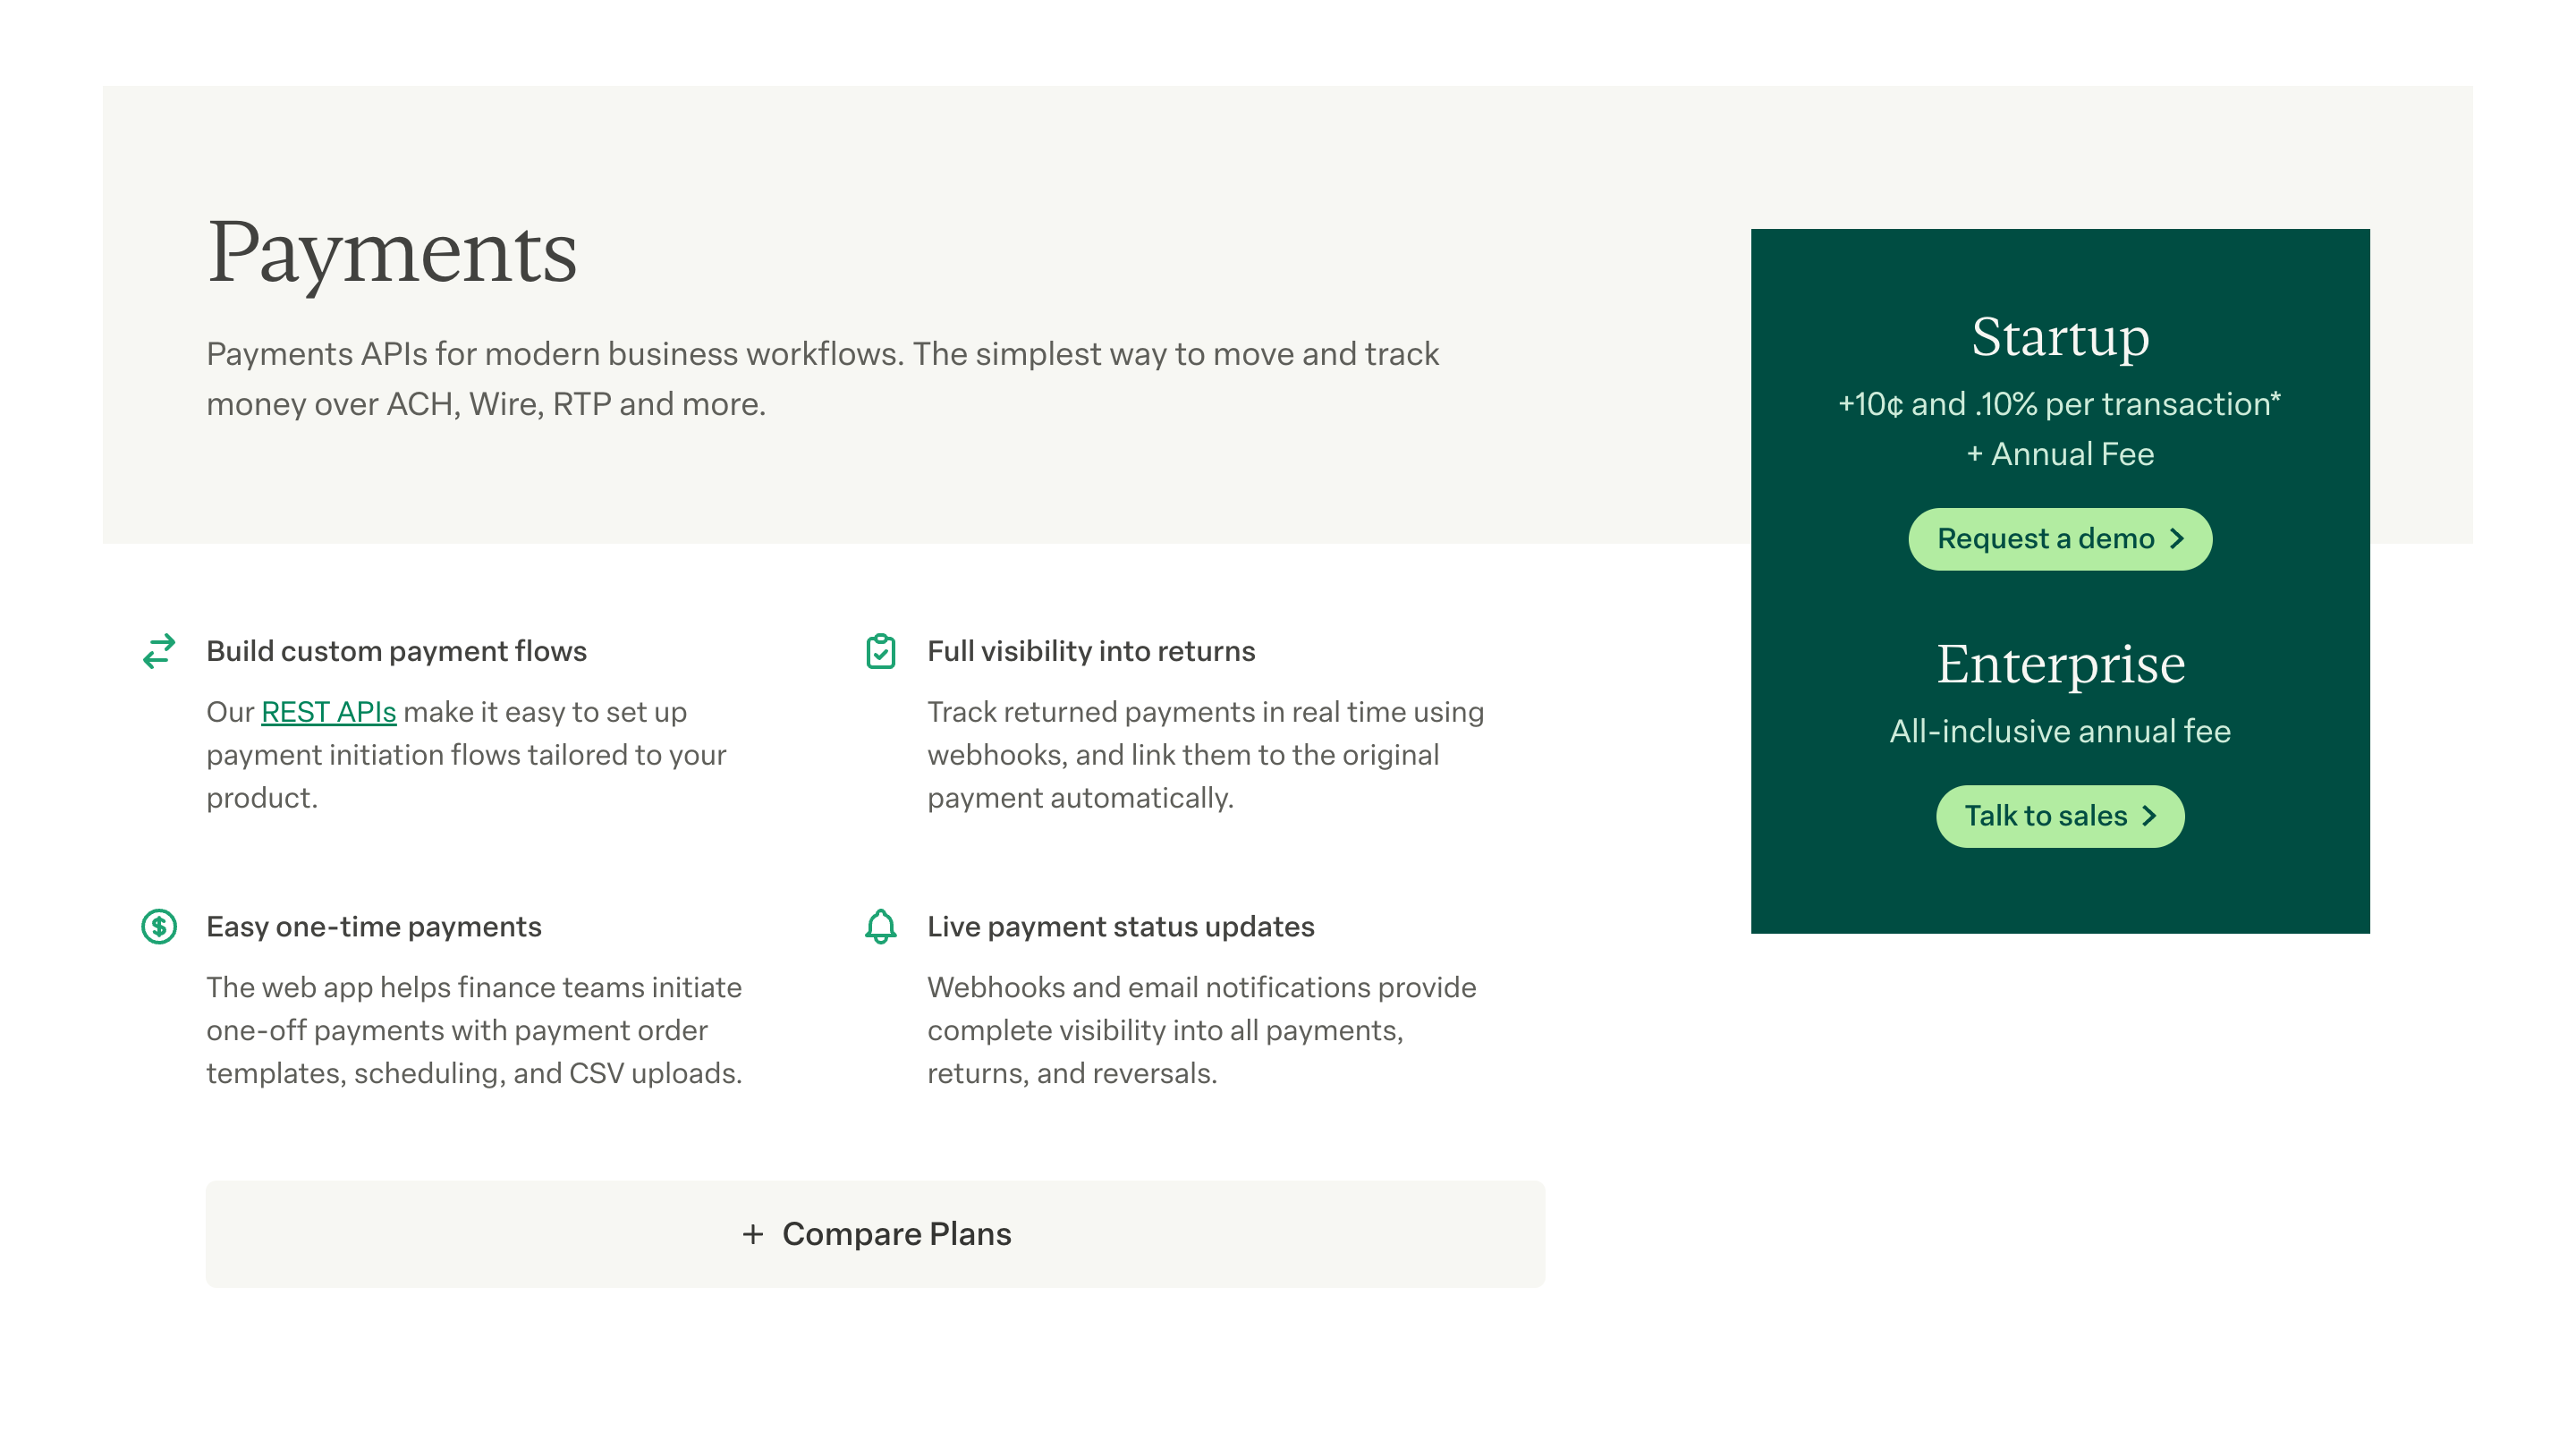 Screenshot of the 'Payments' section on the Modern Treasury website. The section explains the features of the Modern Treasury payments APIs, and has calls-to-action to 'Request a demo', 'Talk to sales', and 'Compare Plans'.